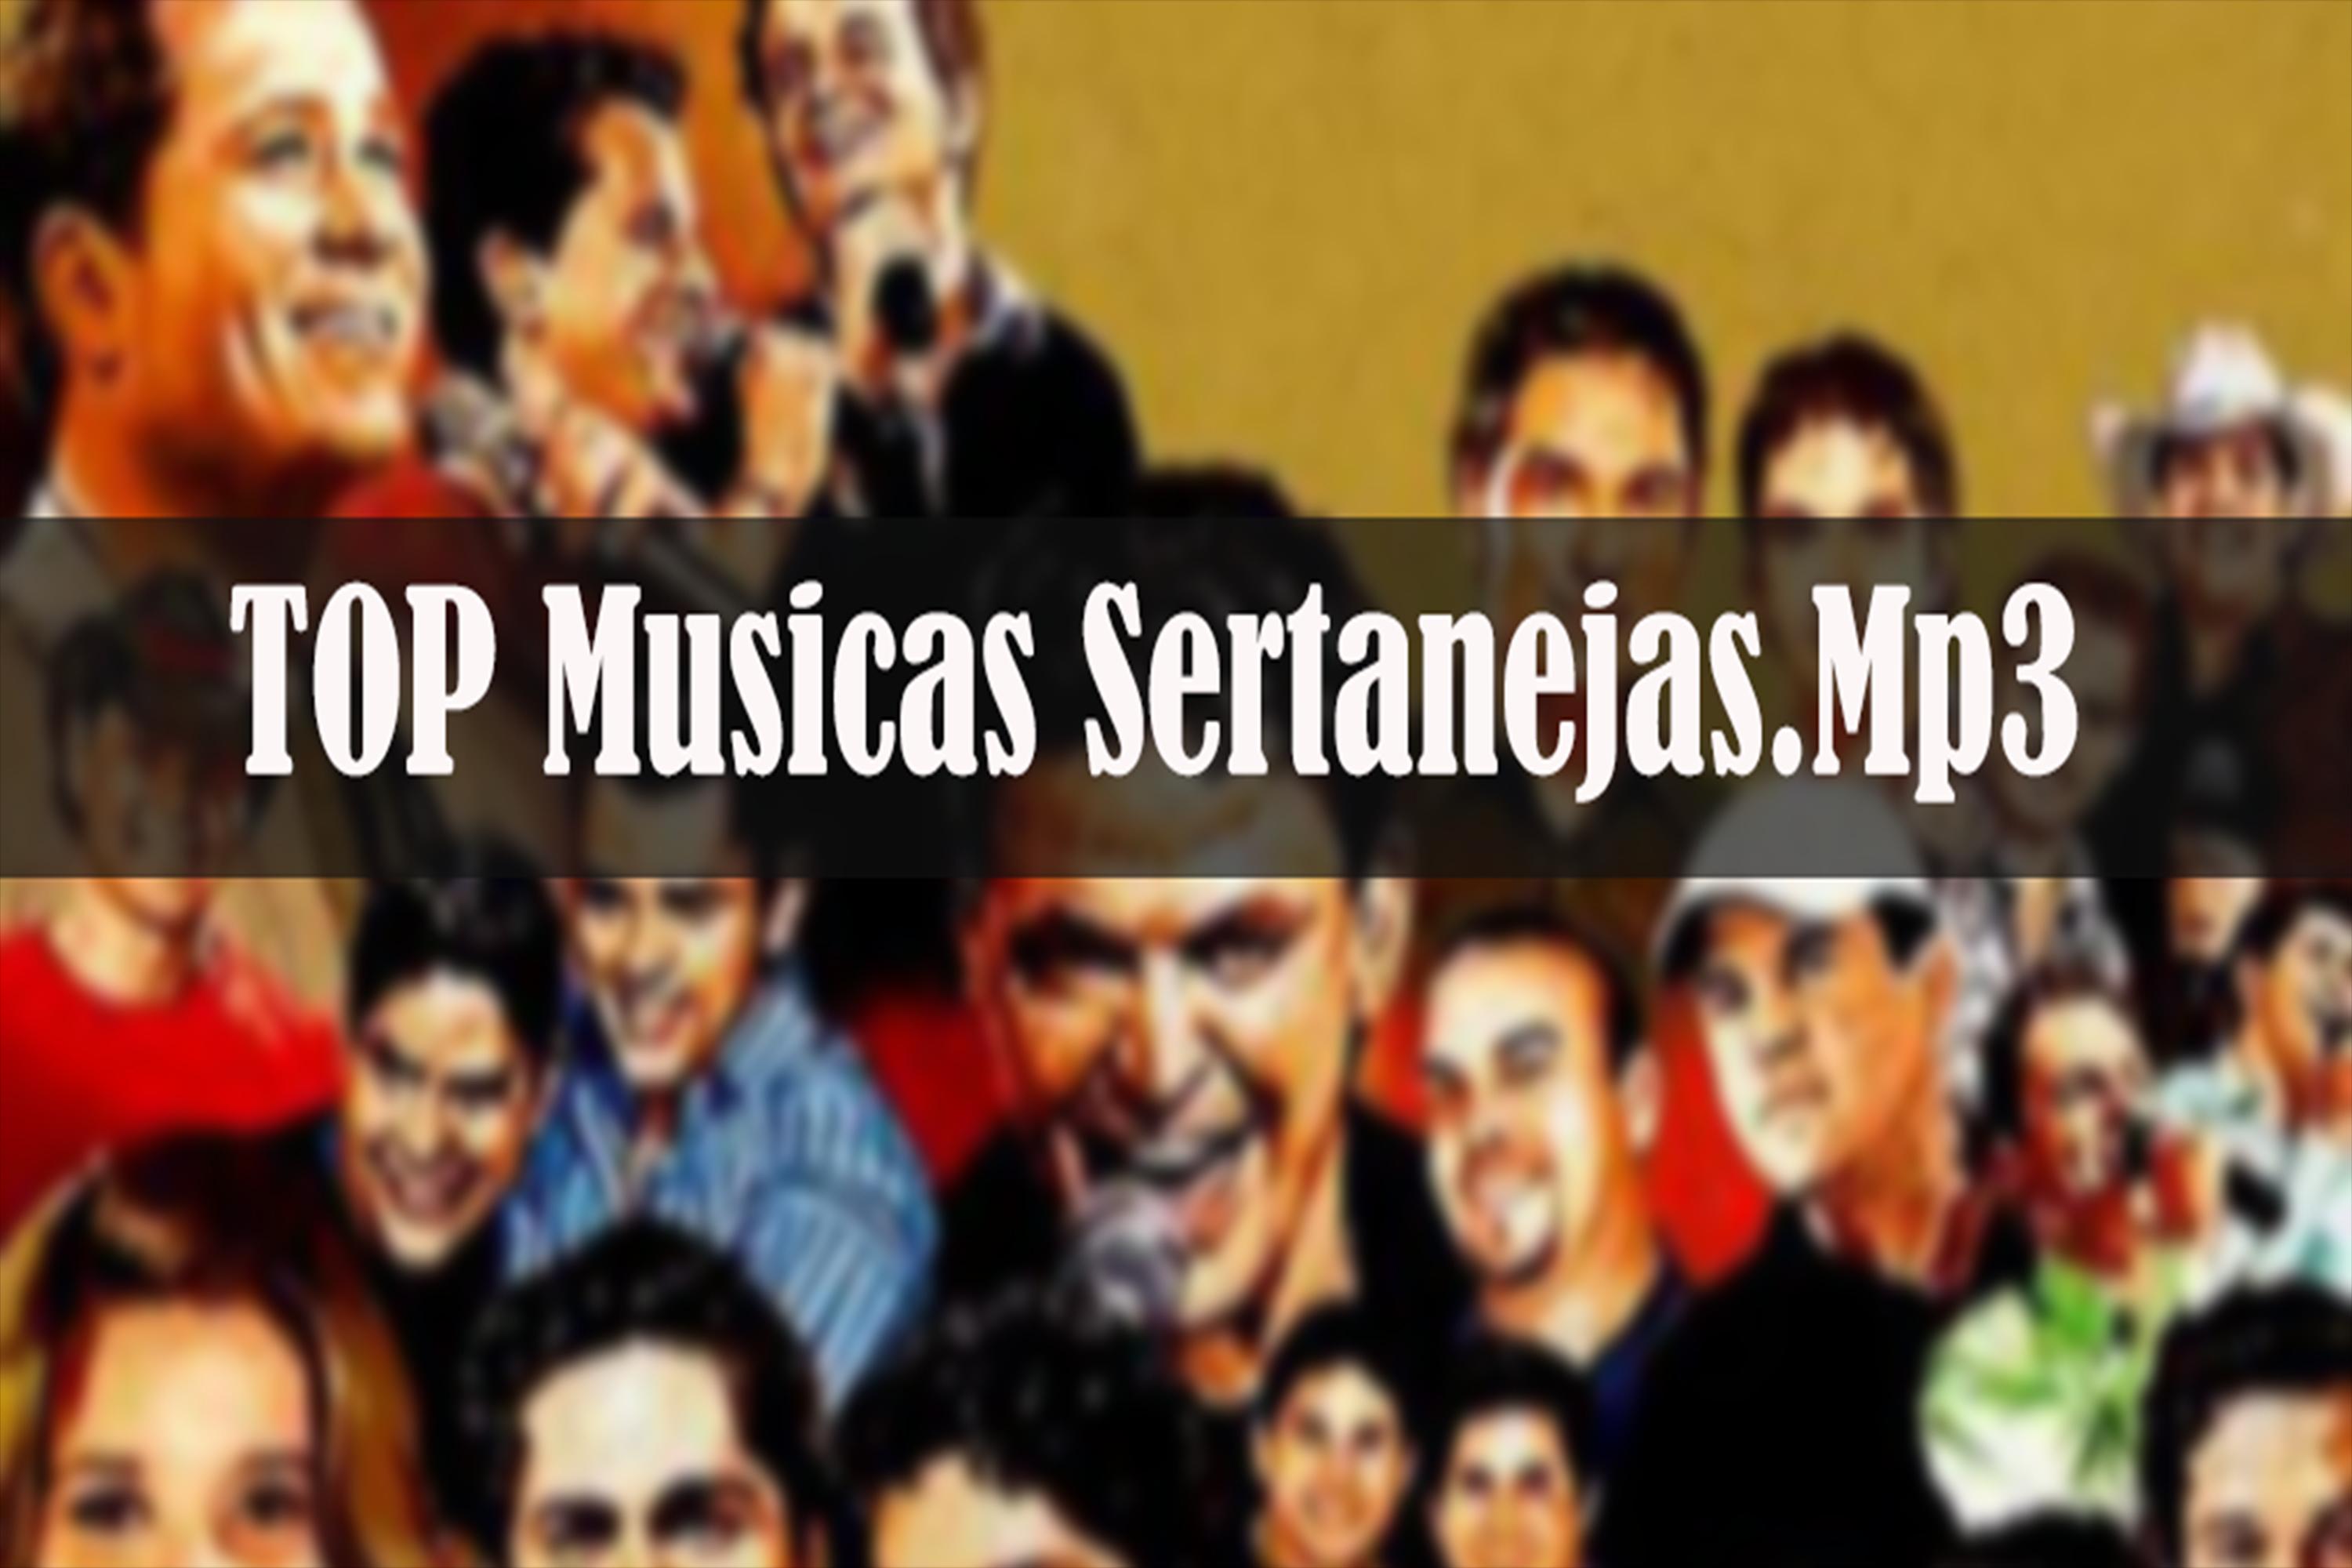 TOP Musicas Sertanejo.Mp3 for Android - APK Download